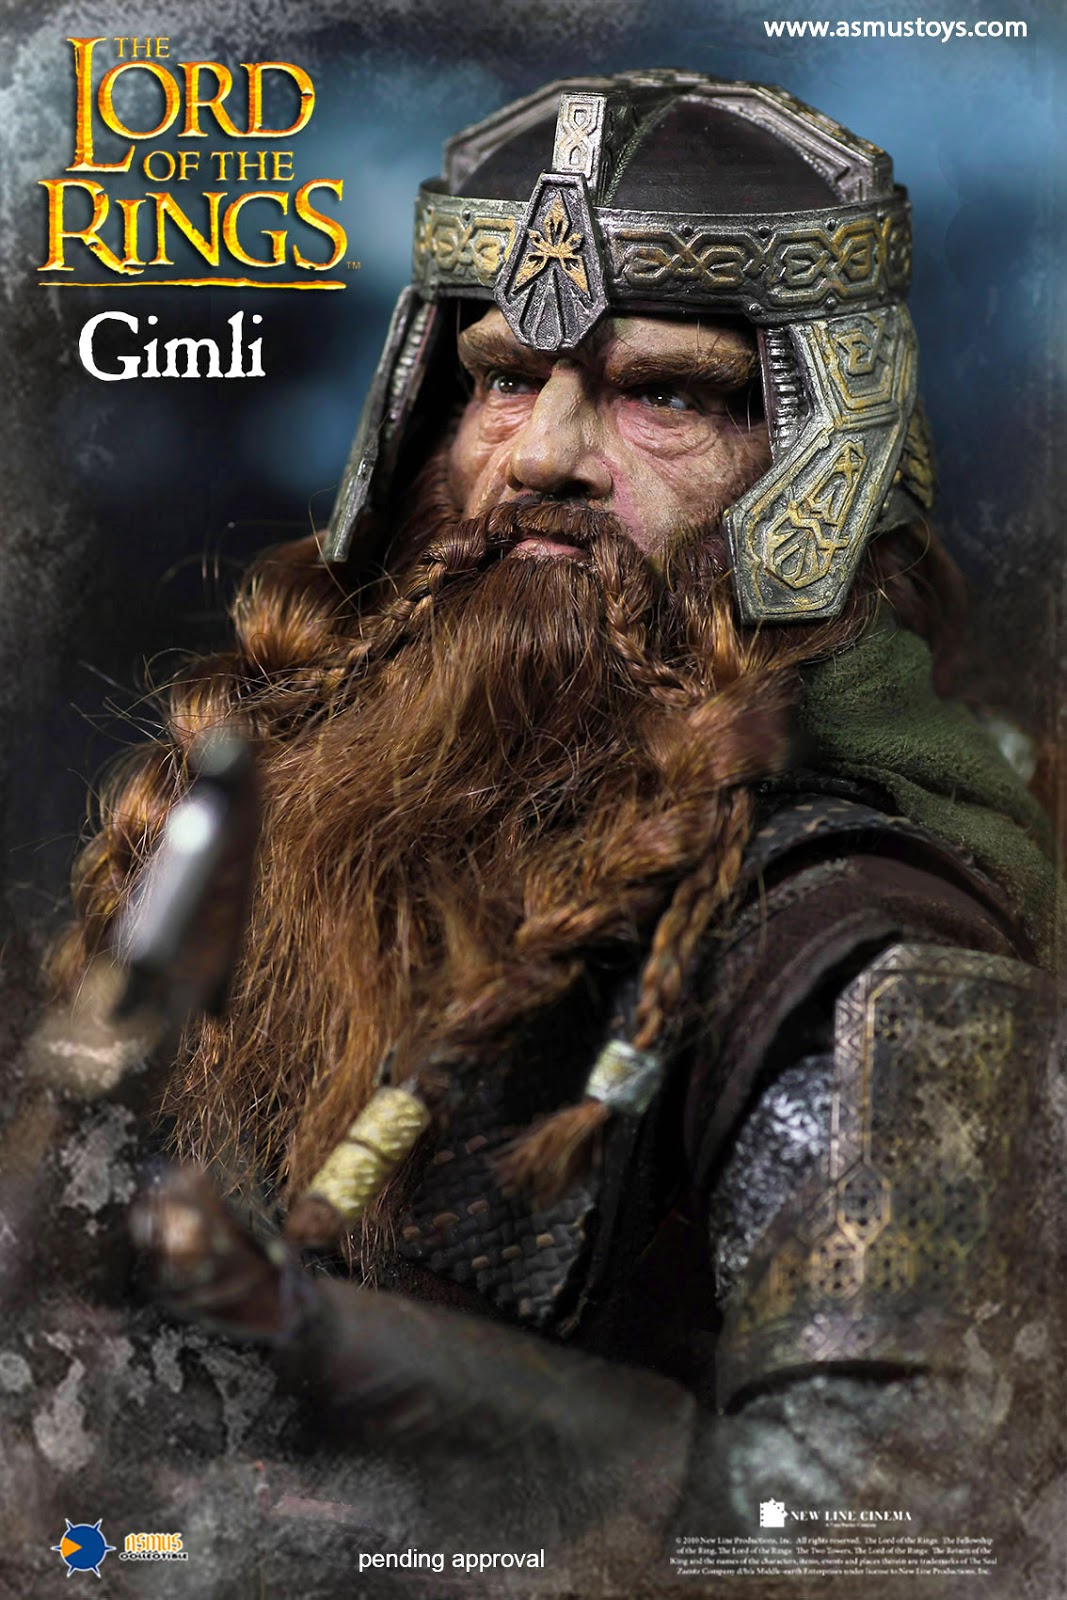 The Lord of the Rings - Gimli (Asmus Toys)